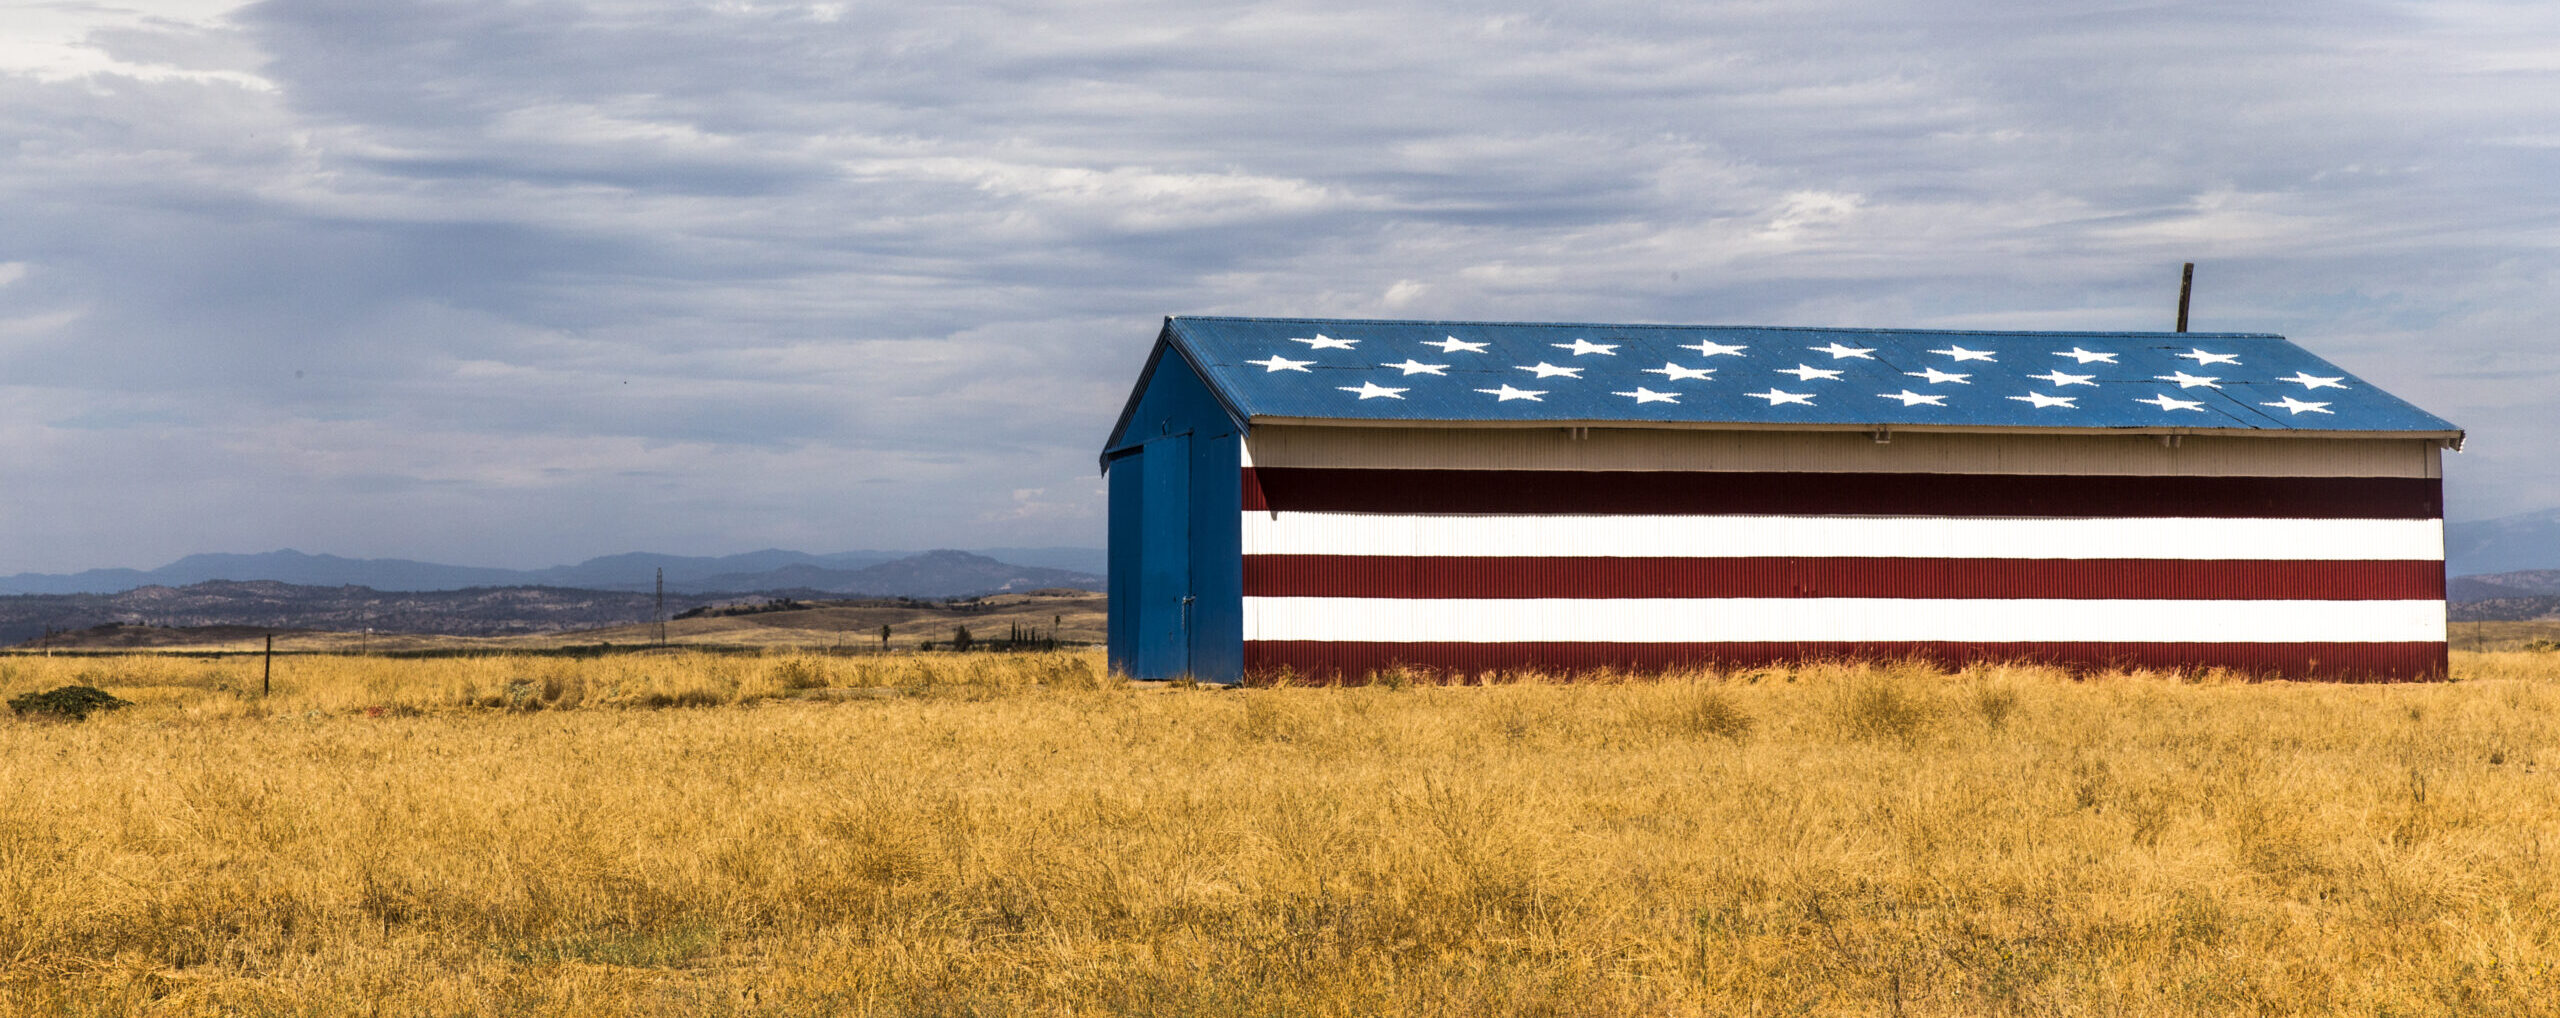 Barn in field painted with stars and stripes, California, USA (Aziz Ary Neto/Image Source via Getty Images)